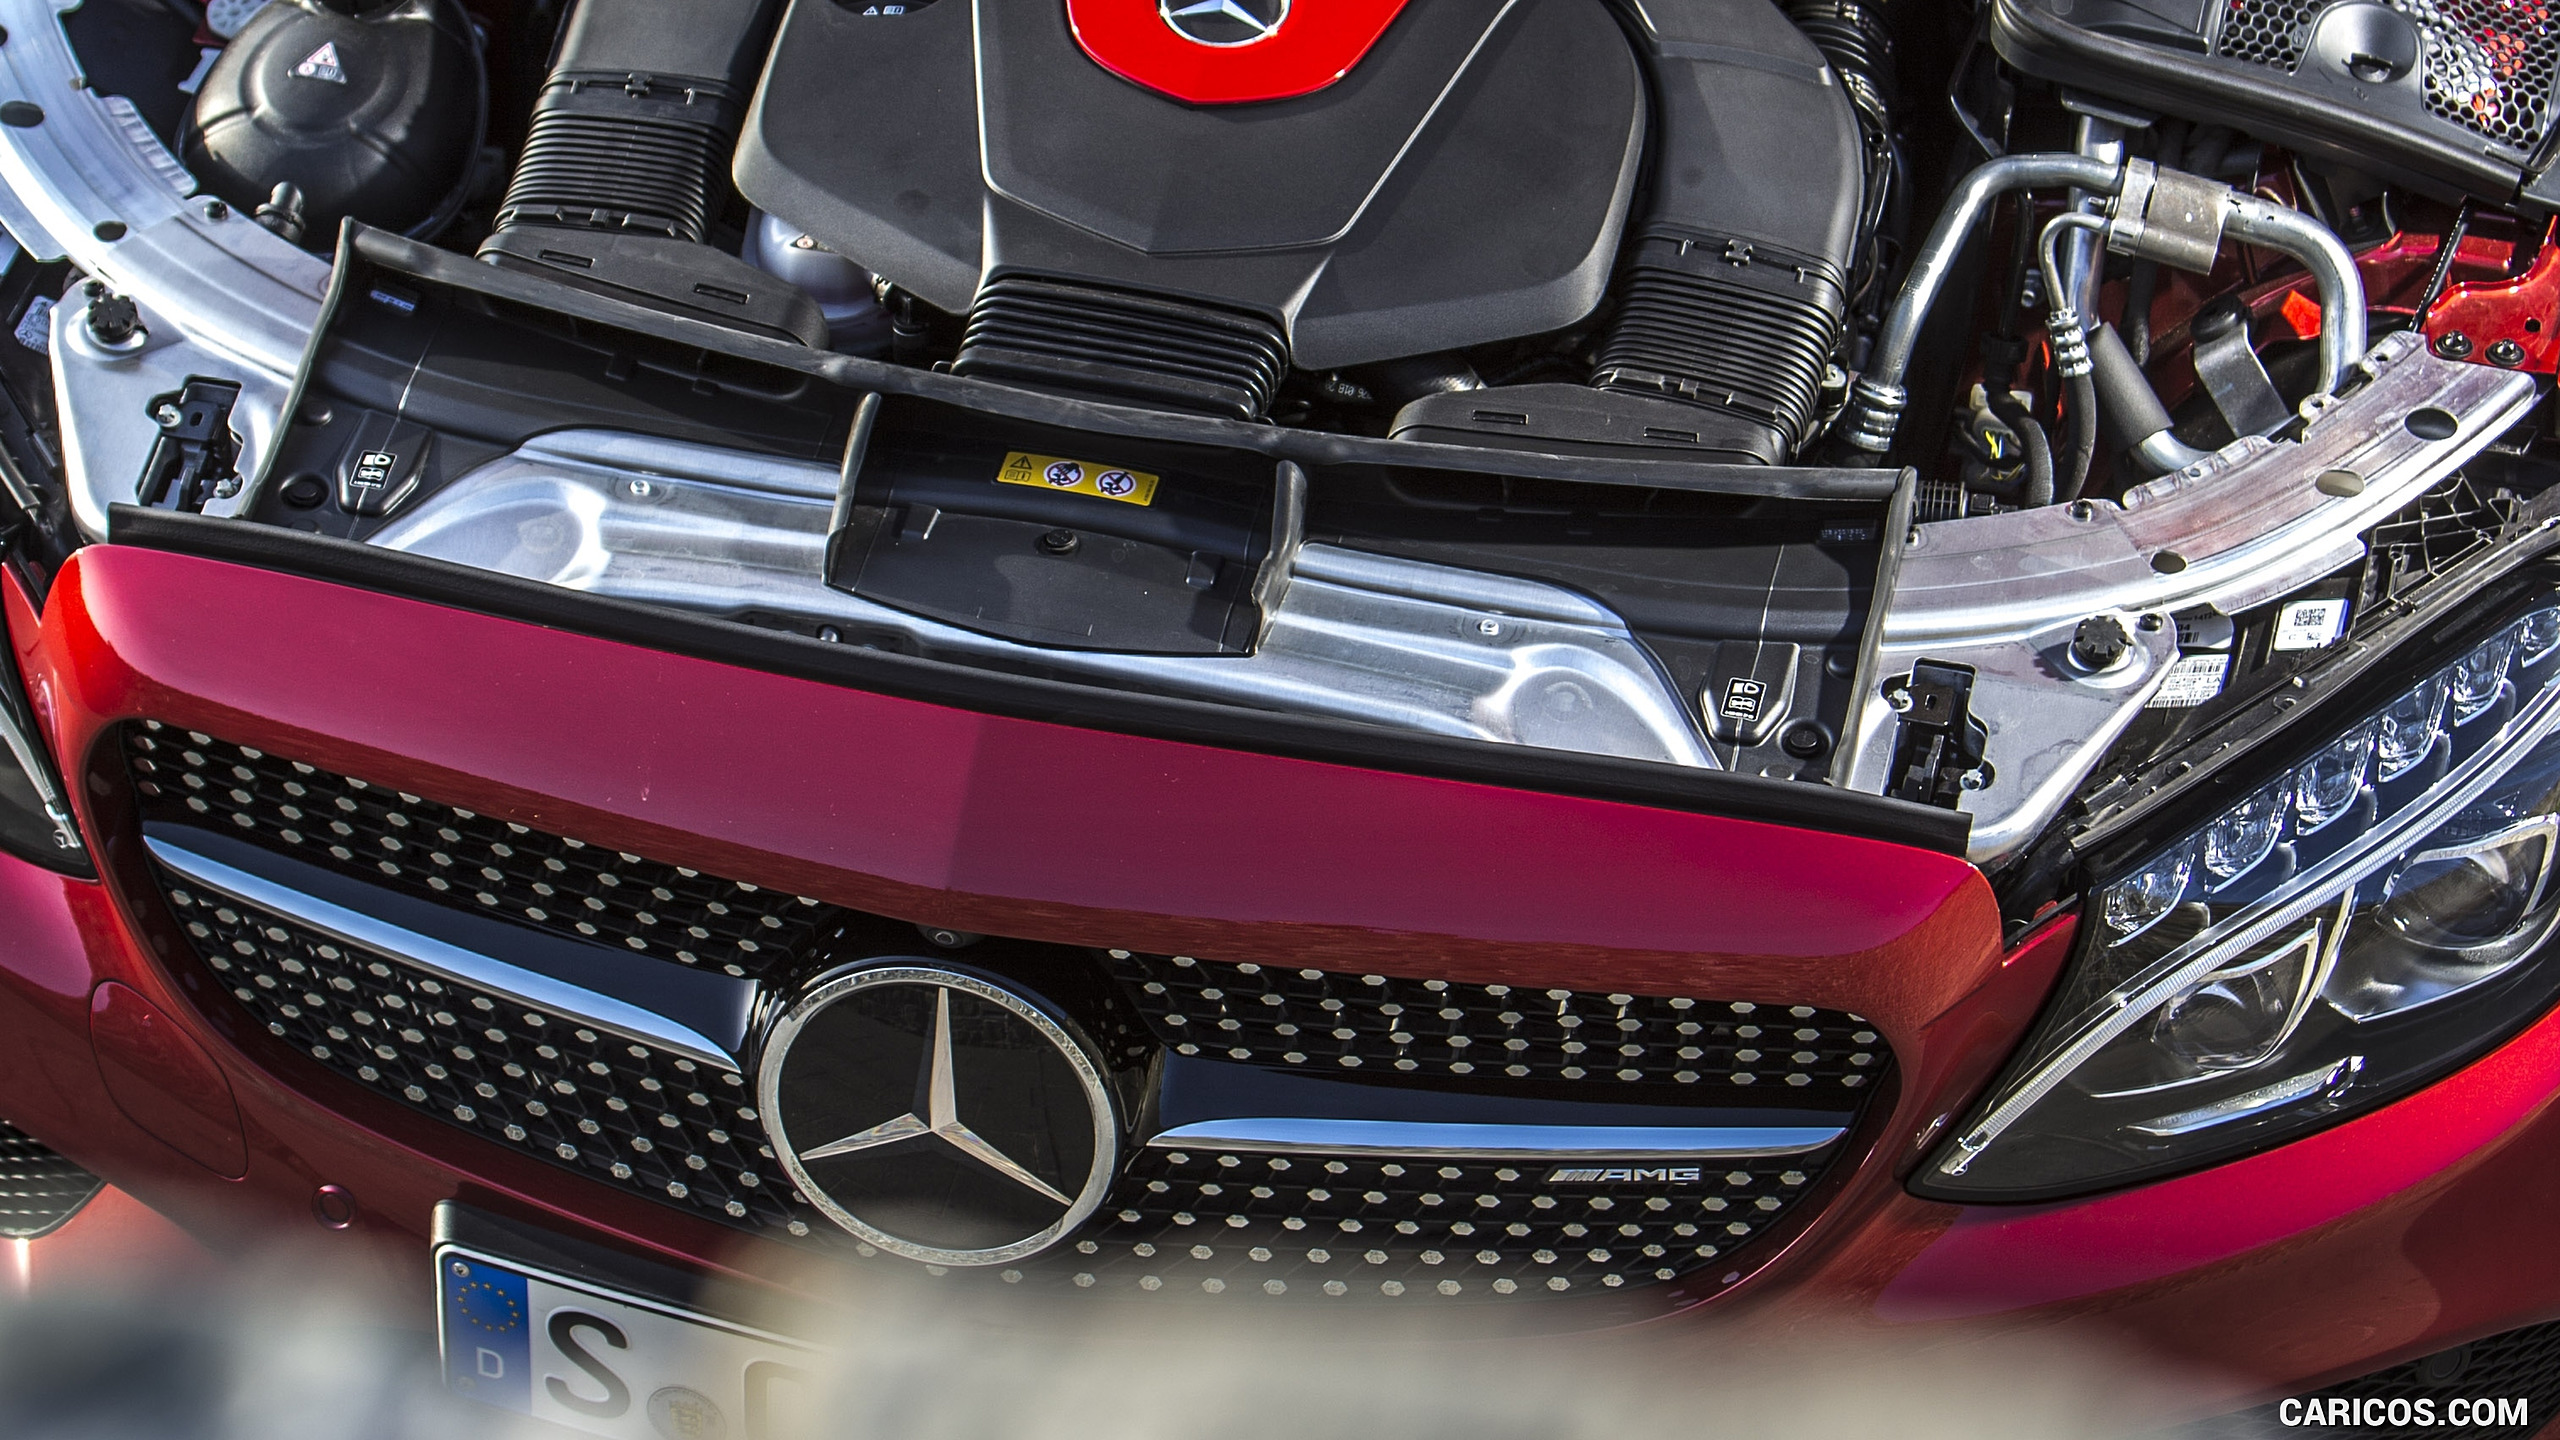 2017 Mercedes-AMG C43 4MATIC Coupé - Engine, #29 of 30